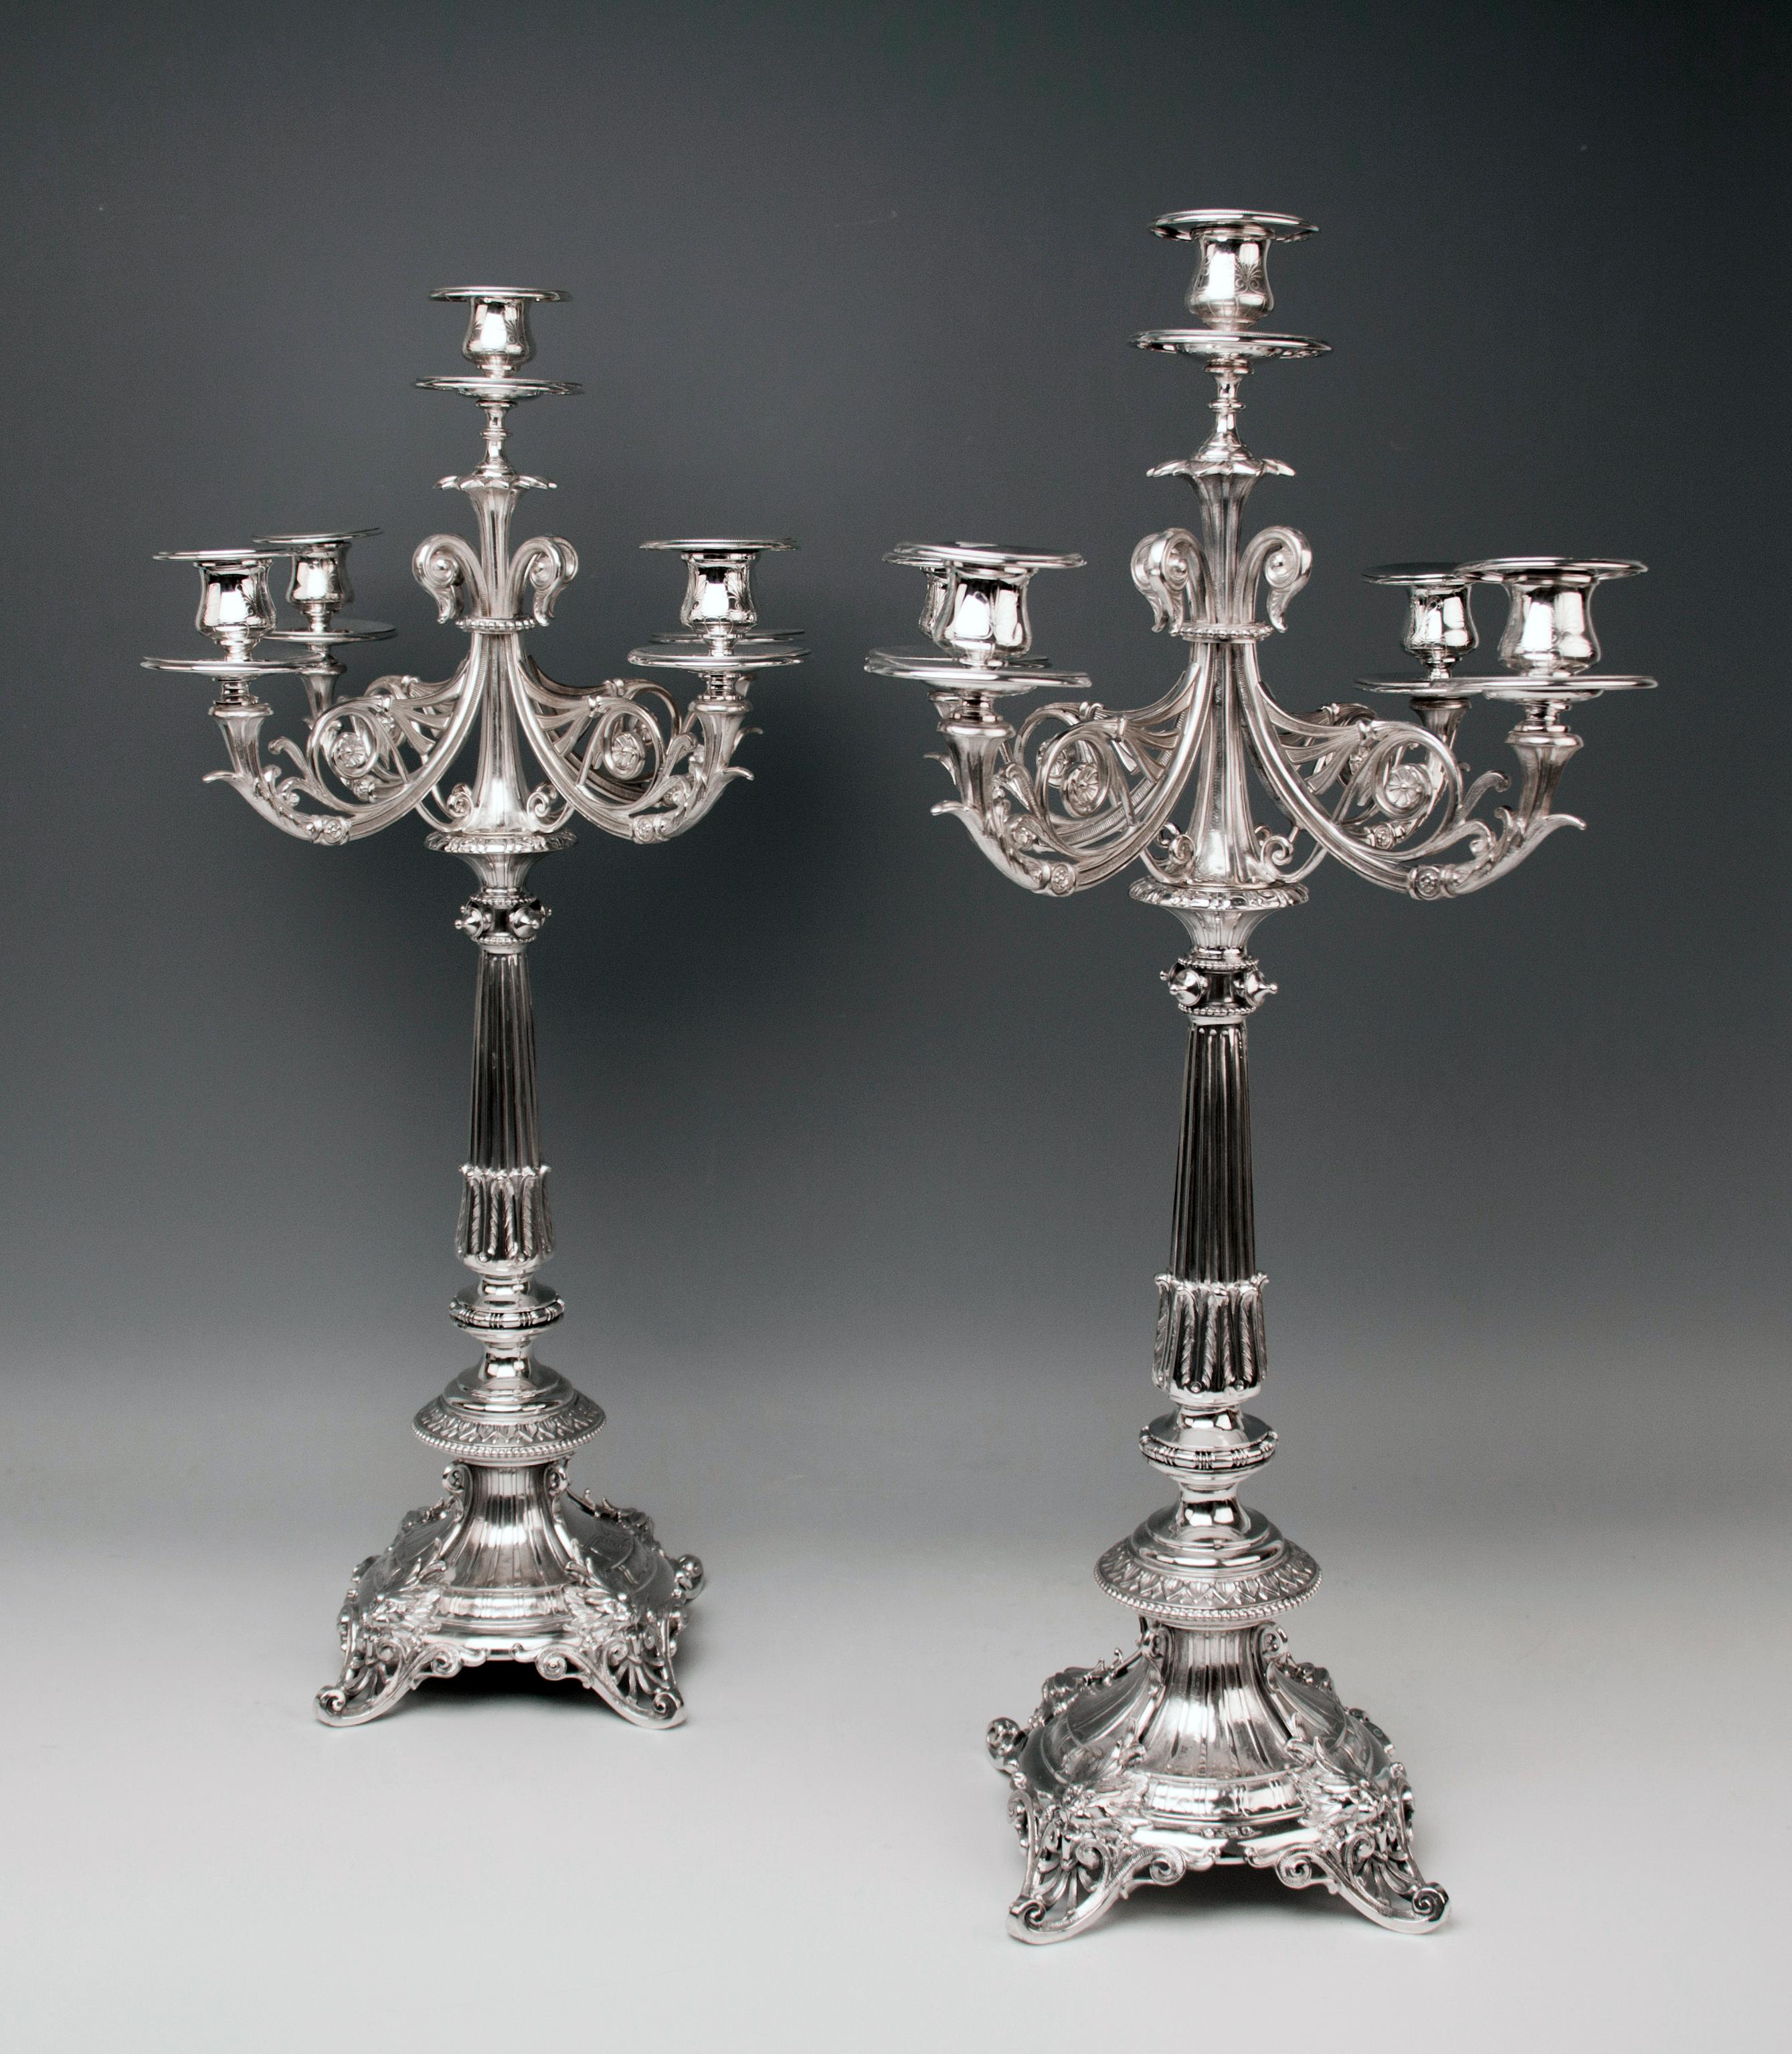 German outstanding silver pair of candlesticks / candelabras, made circa 1855-1865

Outstanding silver candelabras deriving from climax of Victorian period (made circa 1855-1865). - Finest manufacturing quality caused by stunning decorations: